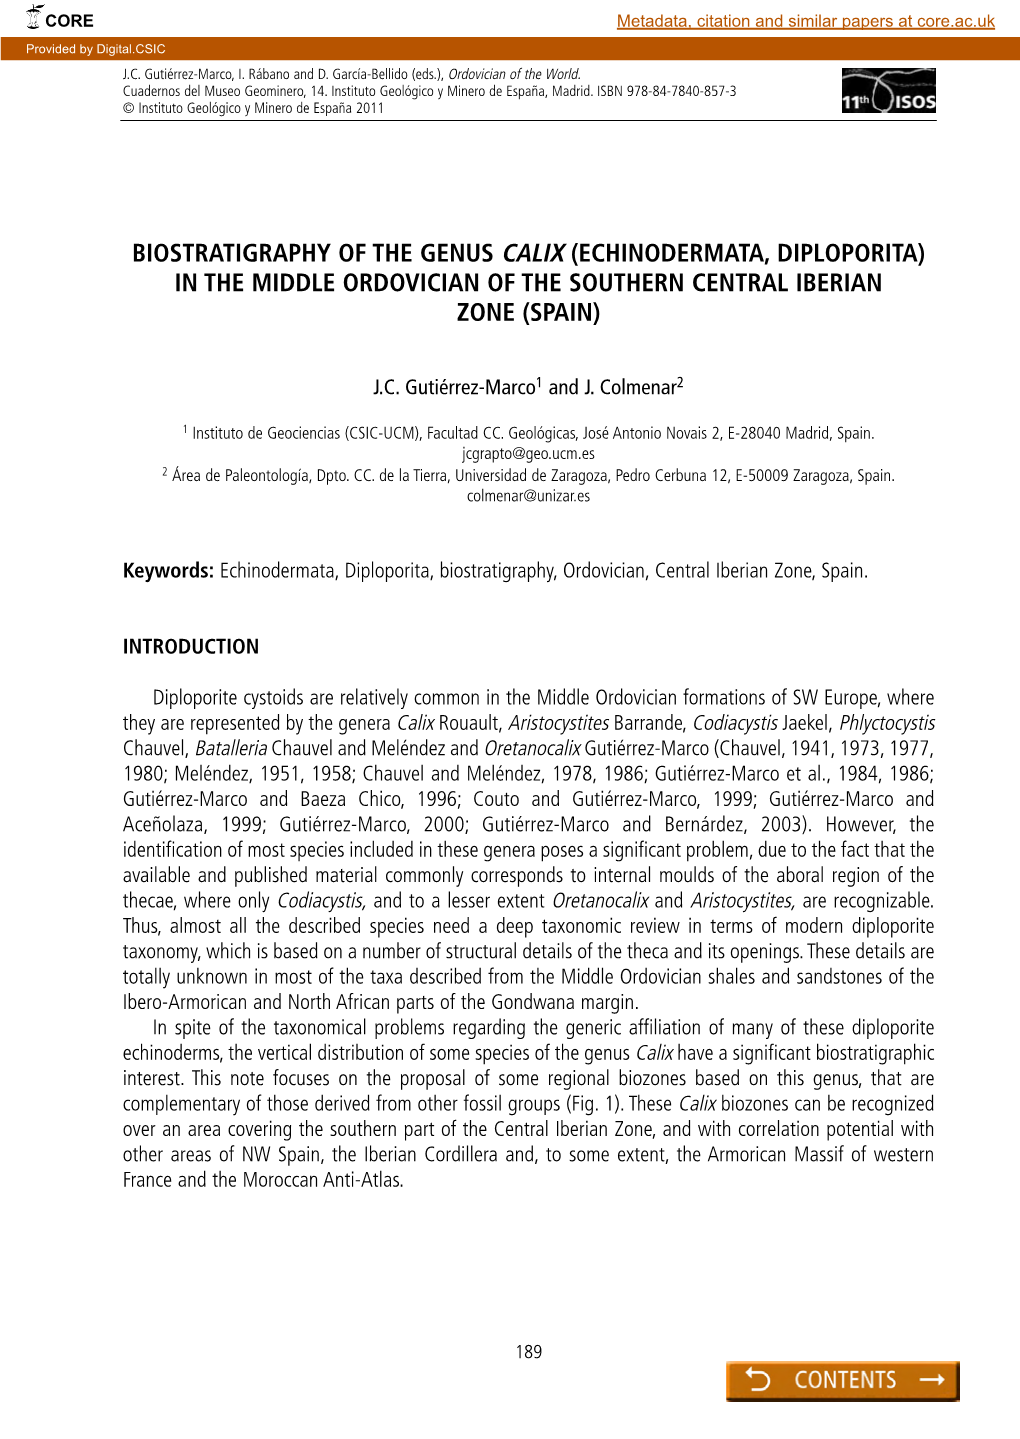 Biostratigraphy of the Genus Calix (Echinodermata, Diploporita) in the Middle Ordovician of the Southern Central Iberian Zone (Spain)